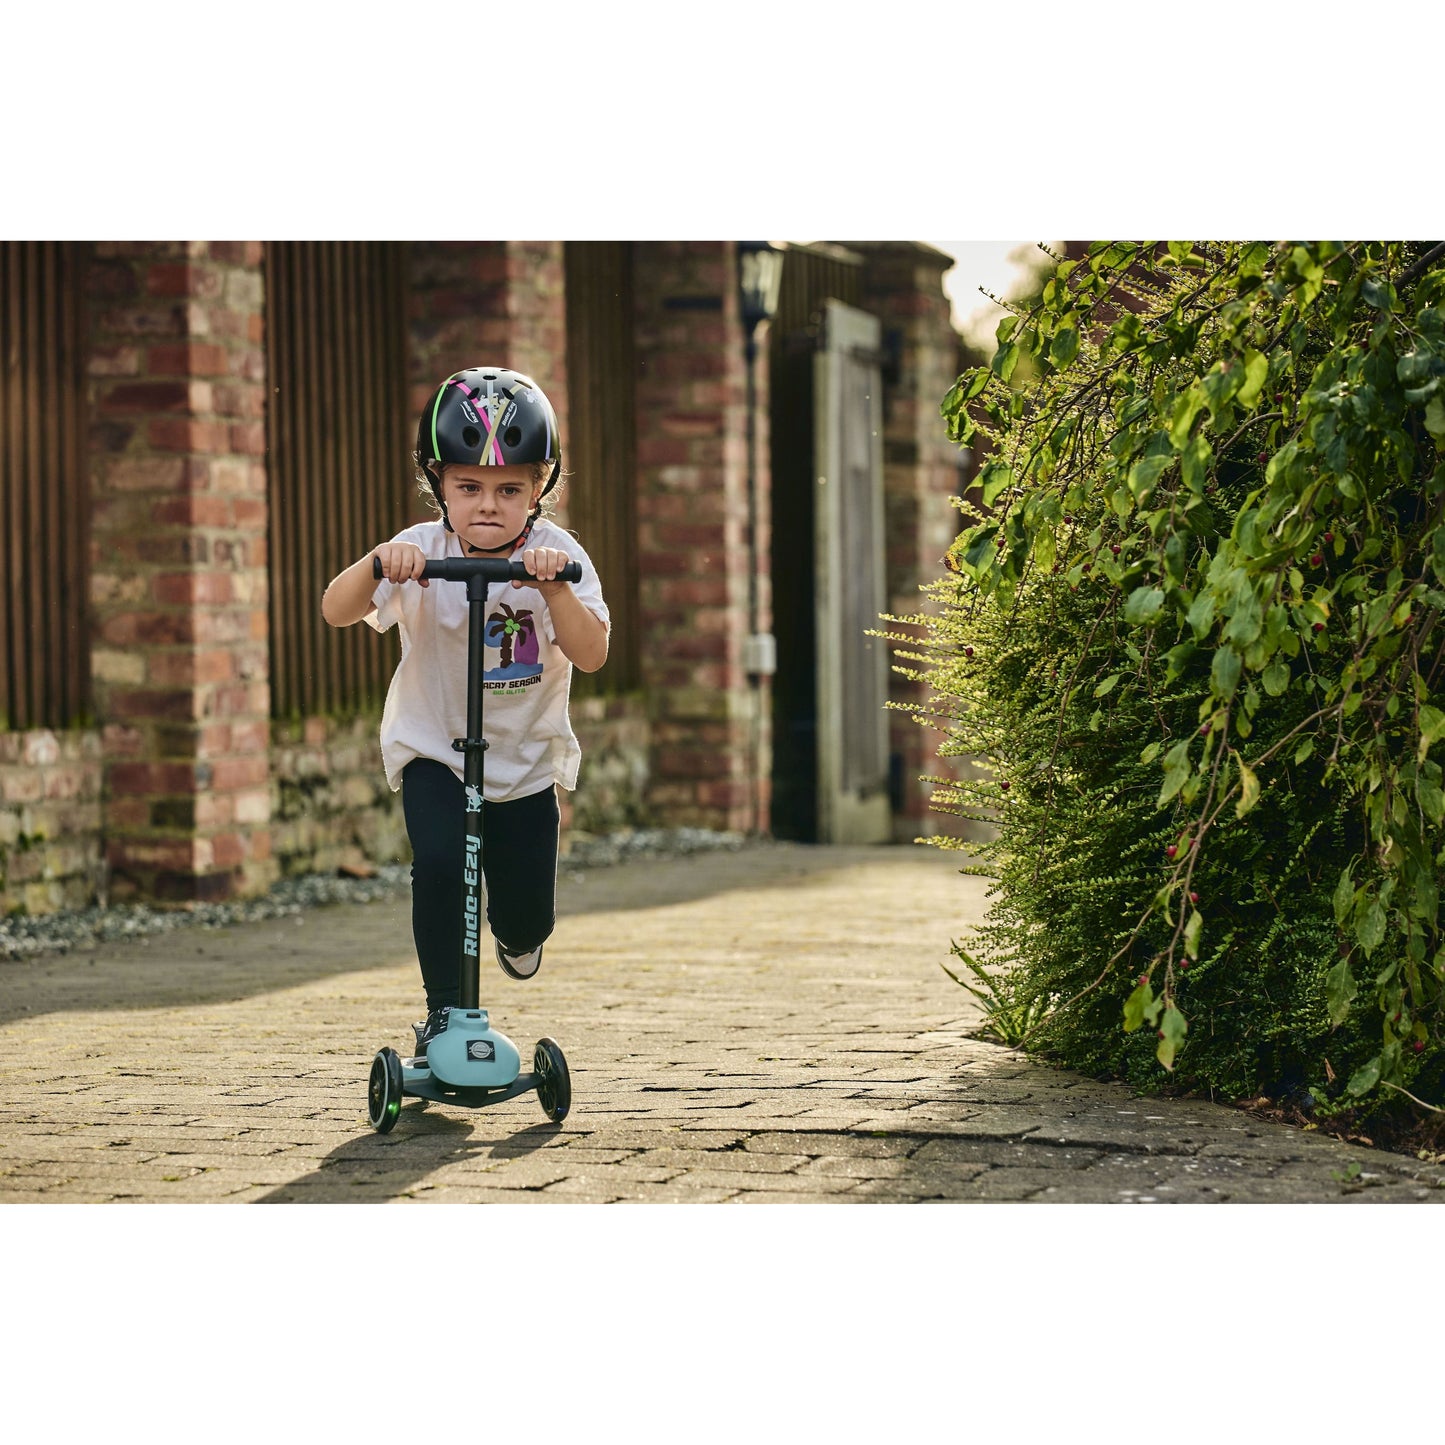 child riding Ride-Ezy Kick Scooter - Kingfisher on pathway